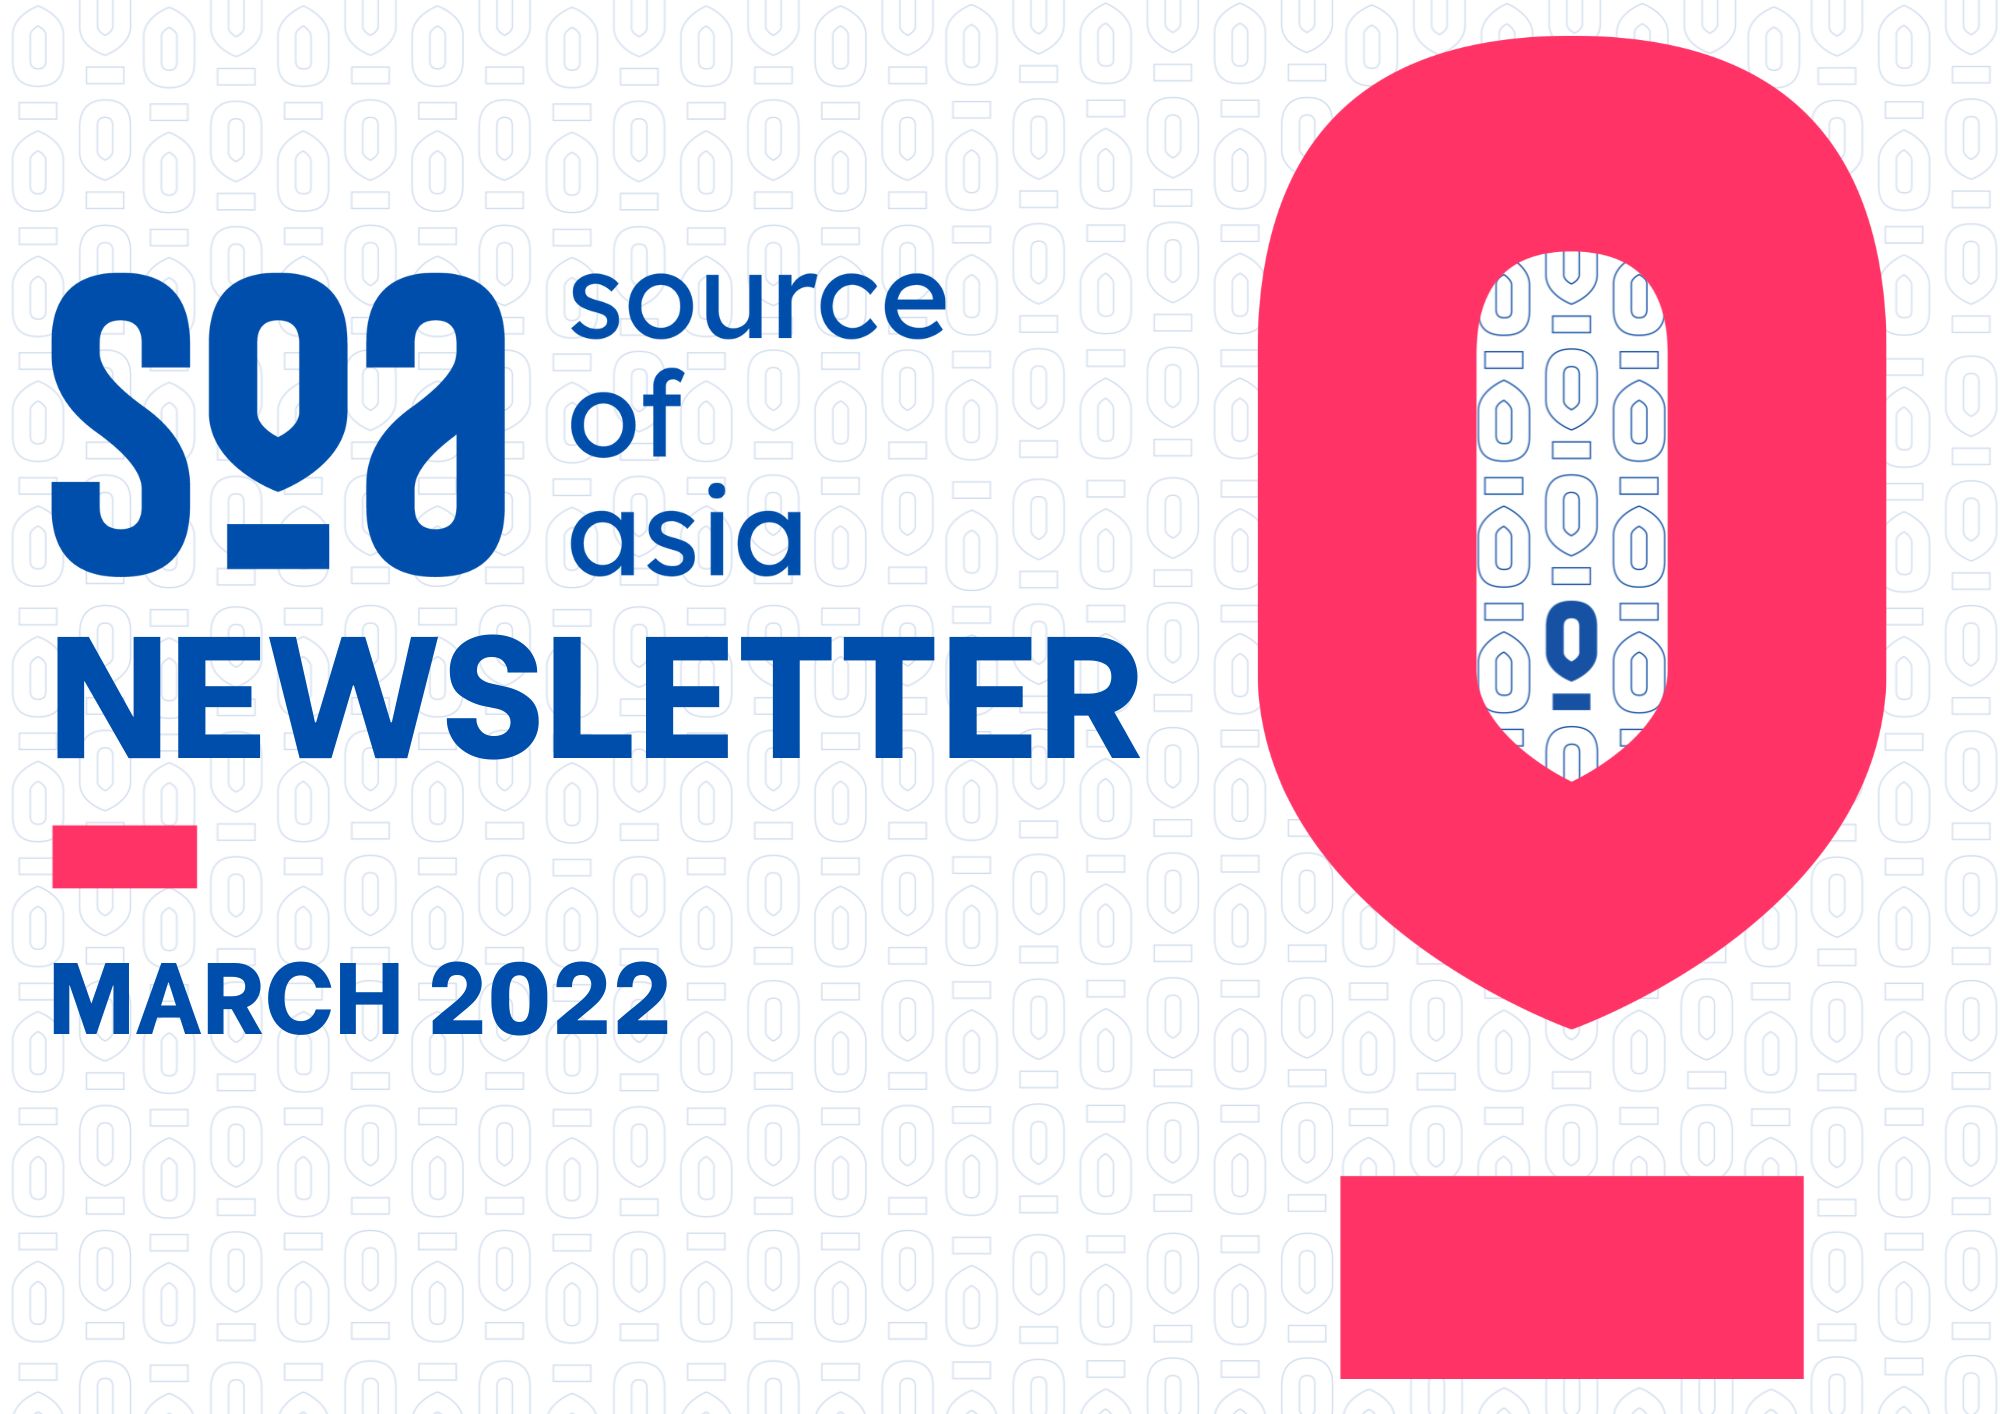 SOA Newsletter – March 2022 edition